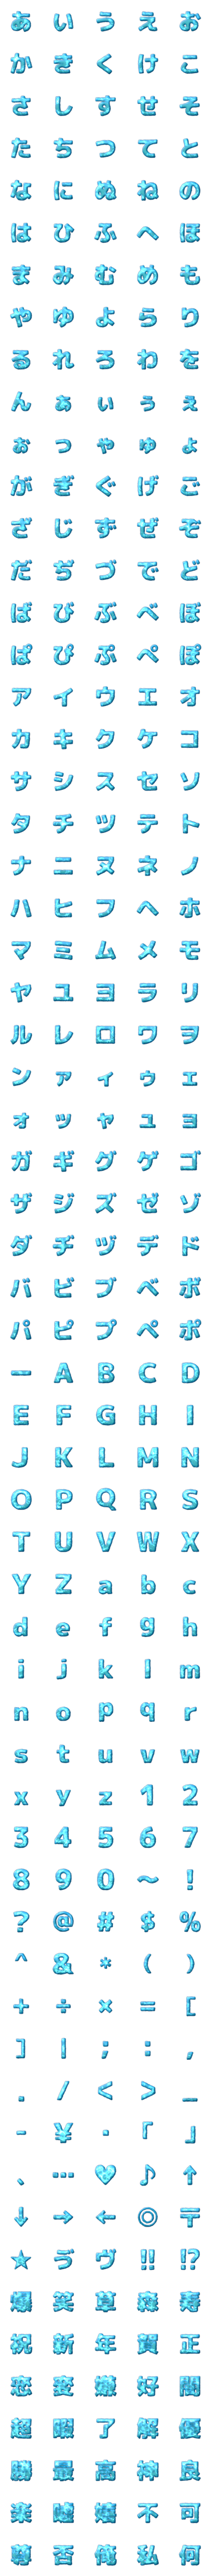 [LINE絵文字]水デコ文字 -ゴシック体-の画像一覧